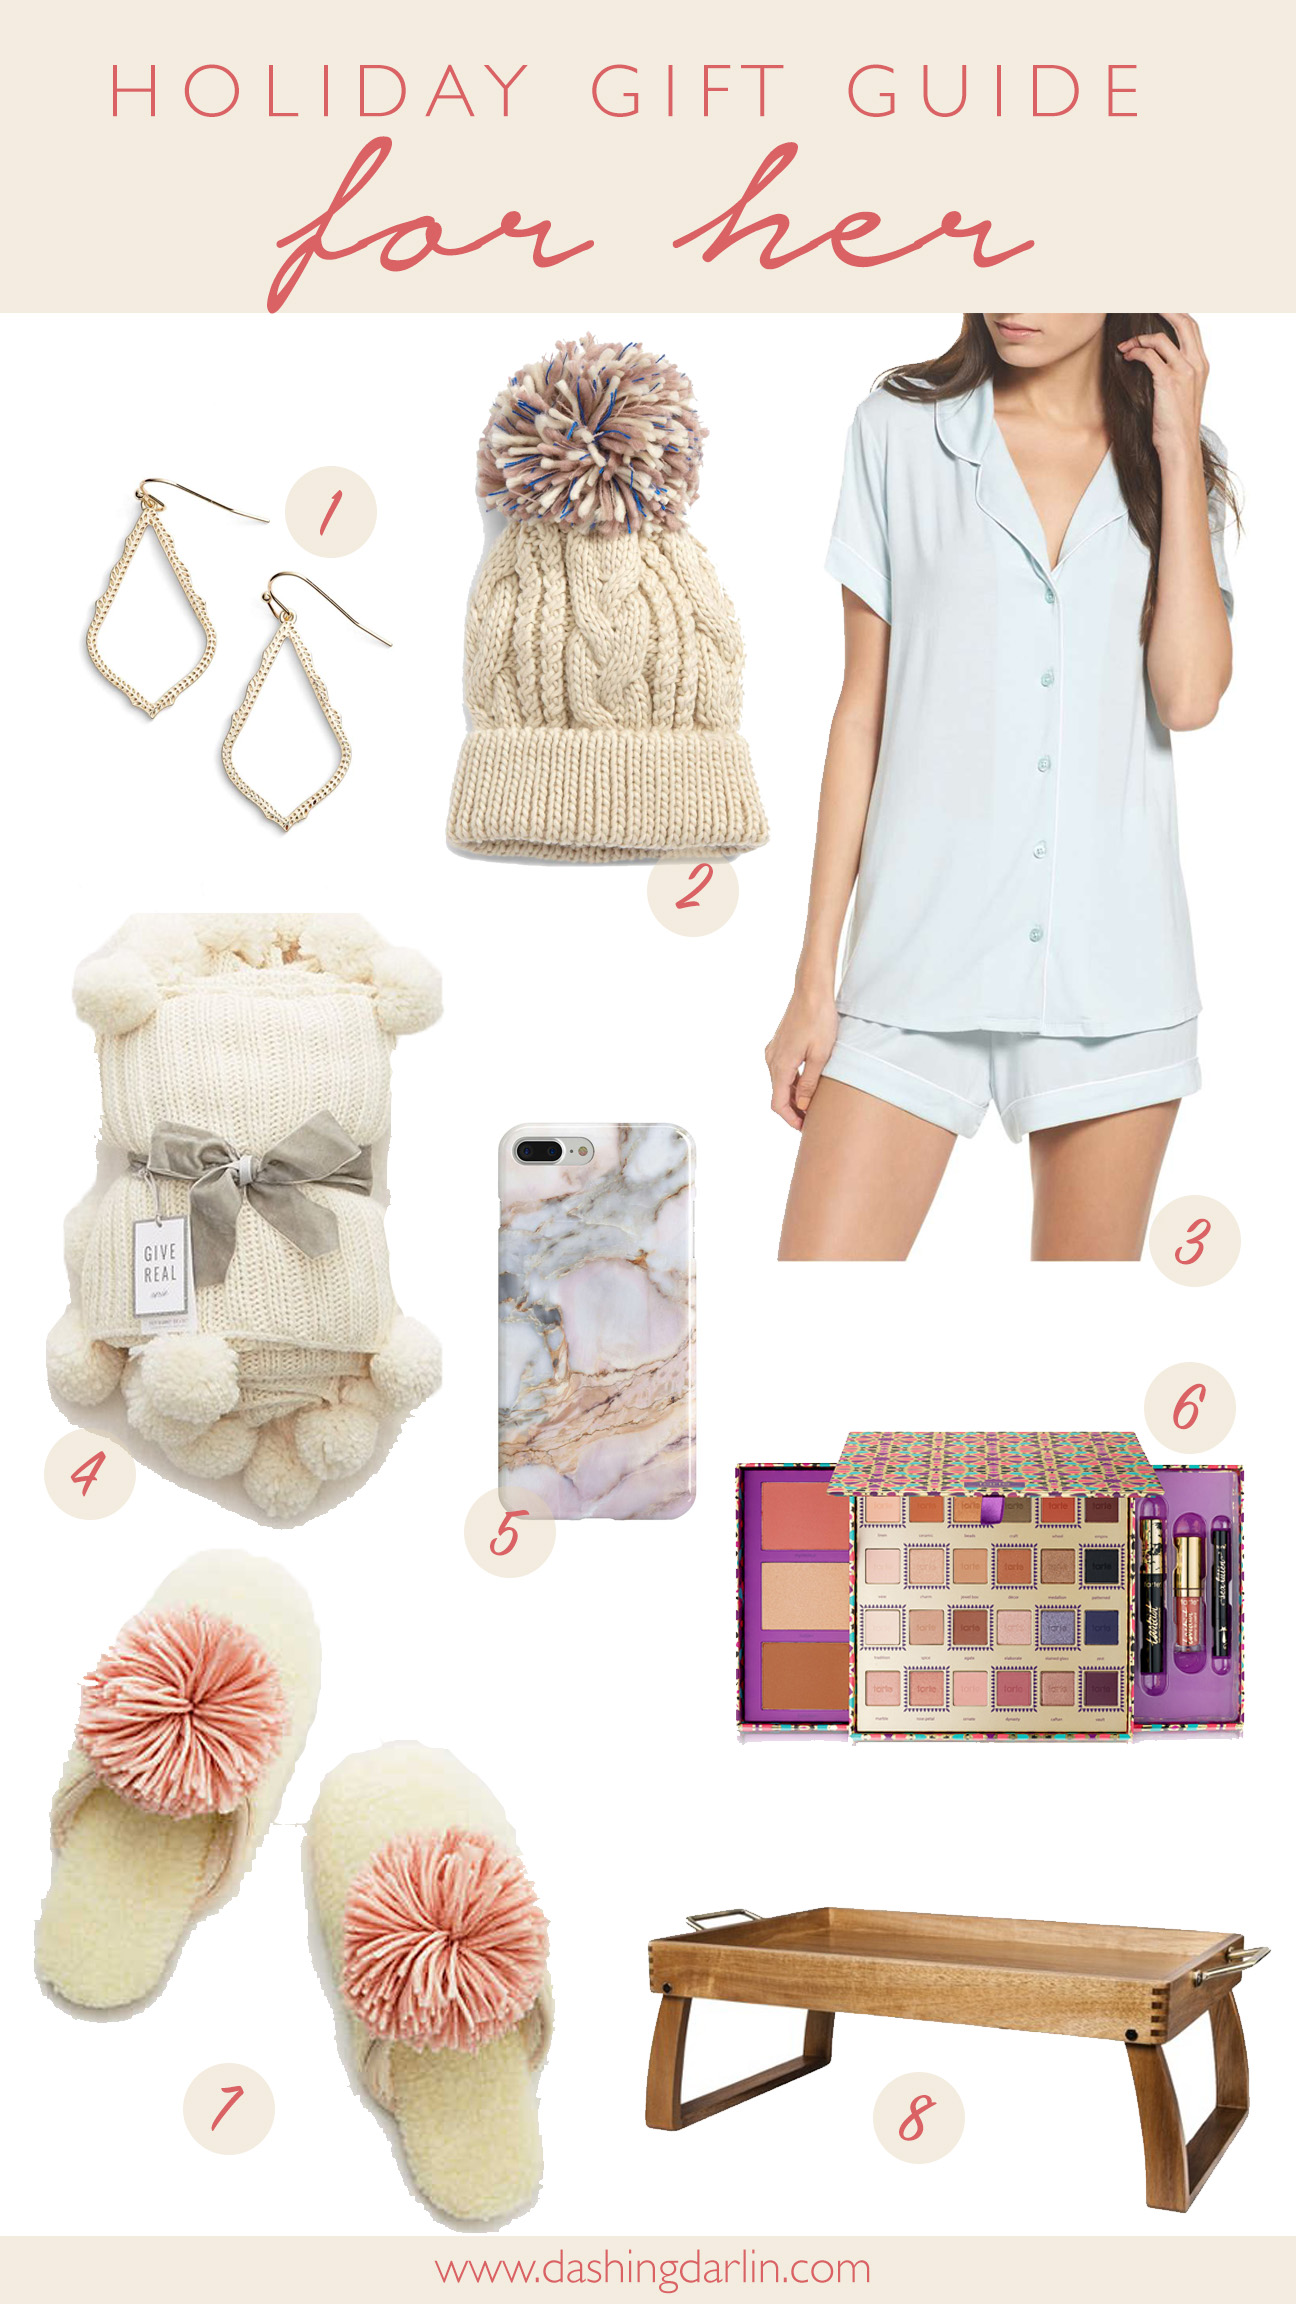 GIFTS THAT SHE WILL LOVE ALL UNDER $55. CHRISTMAS GIFT IDEAS ON THE BLOG.